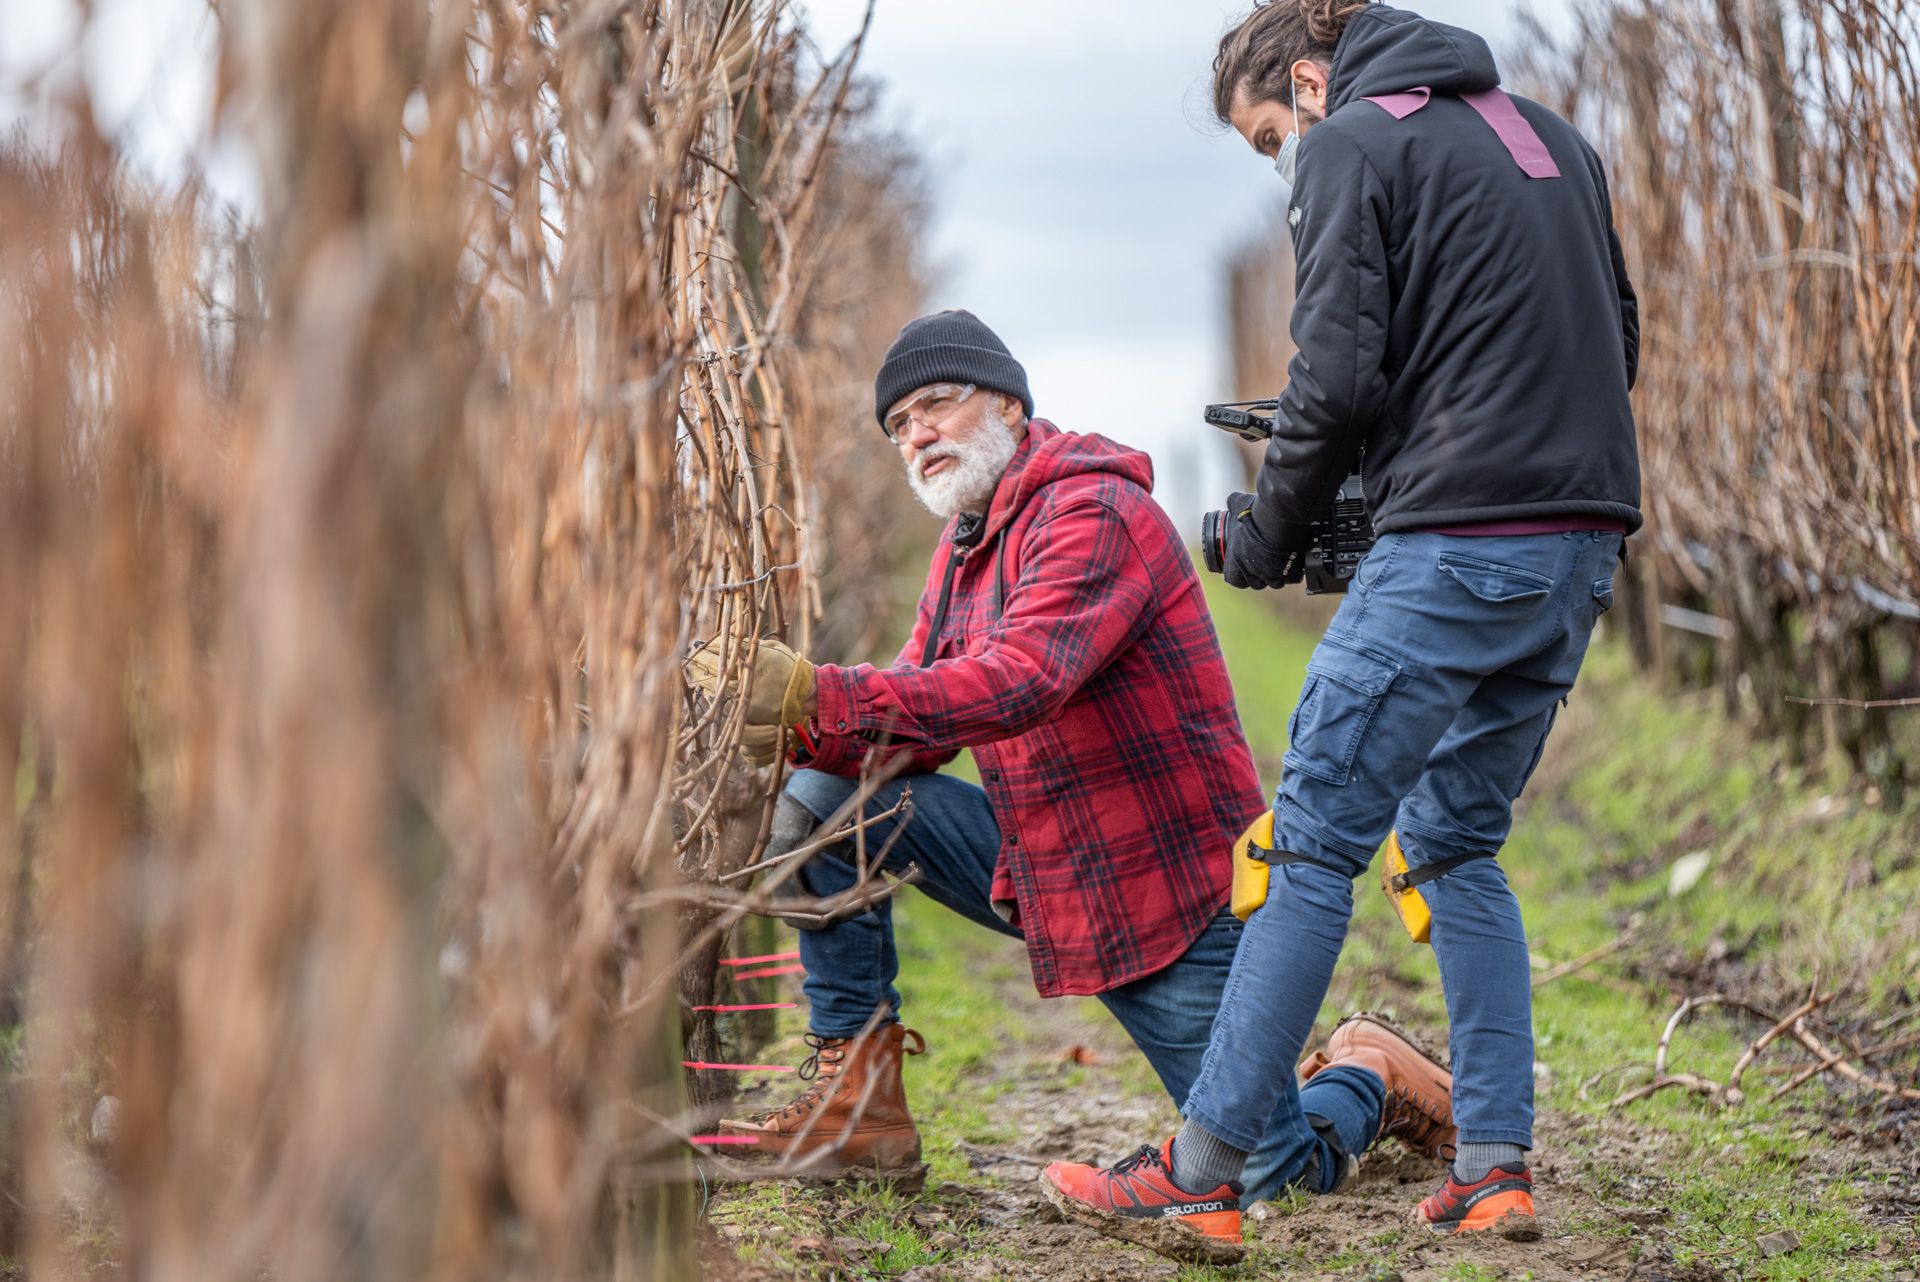 Express spur & cane pruning course with Marco Simonit